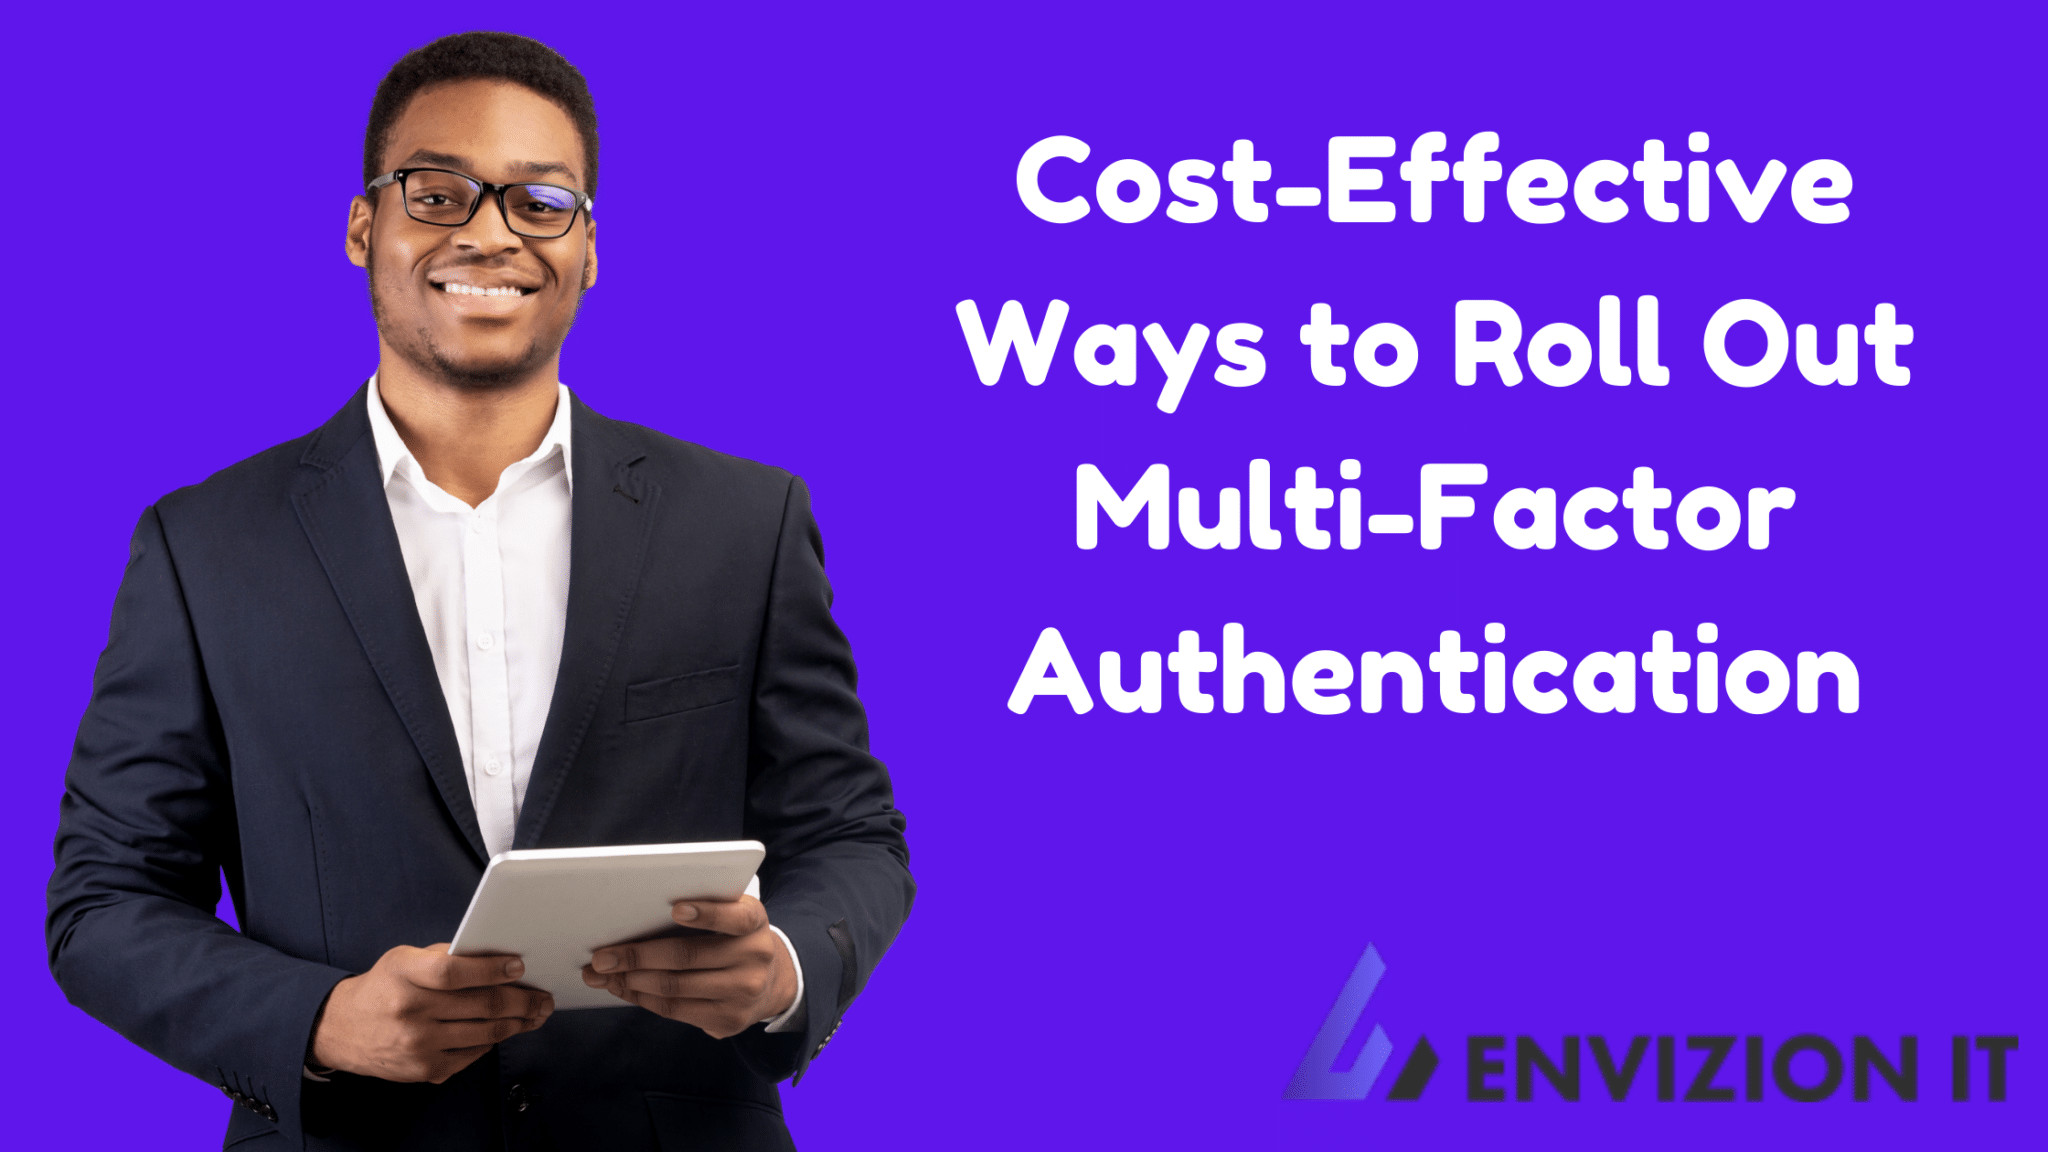 Cost-Effective Ways to Roll Out Multi-Factor Authentication